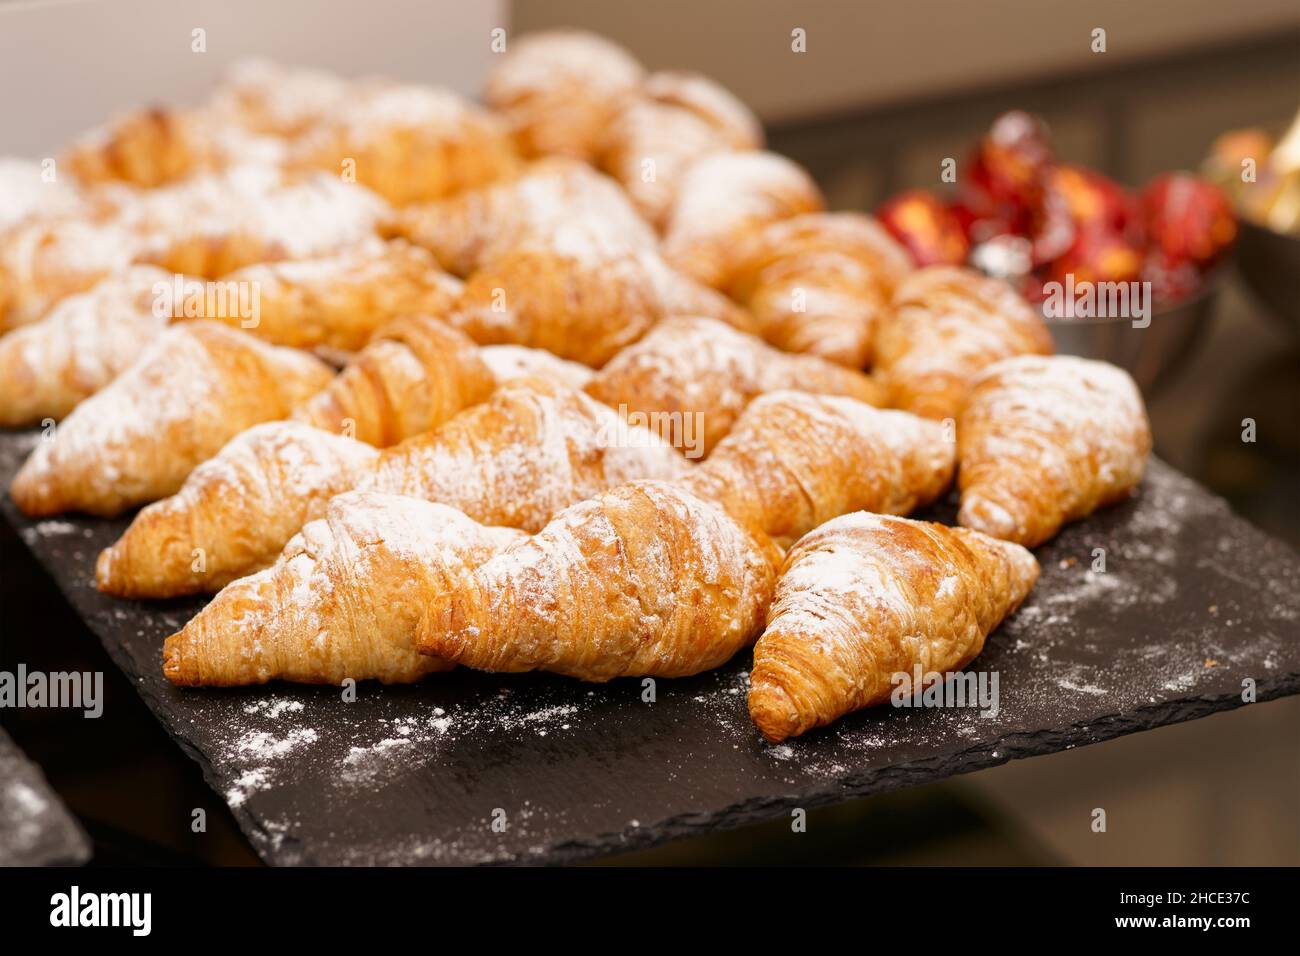 Croissants served on a banquet table Stock Photo